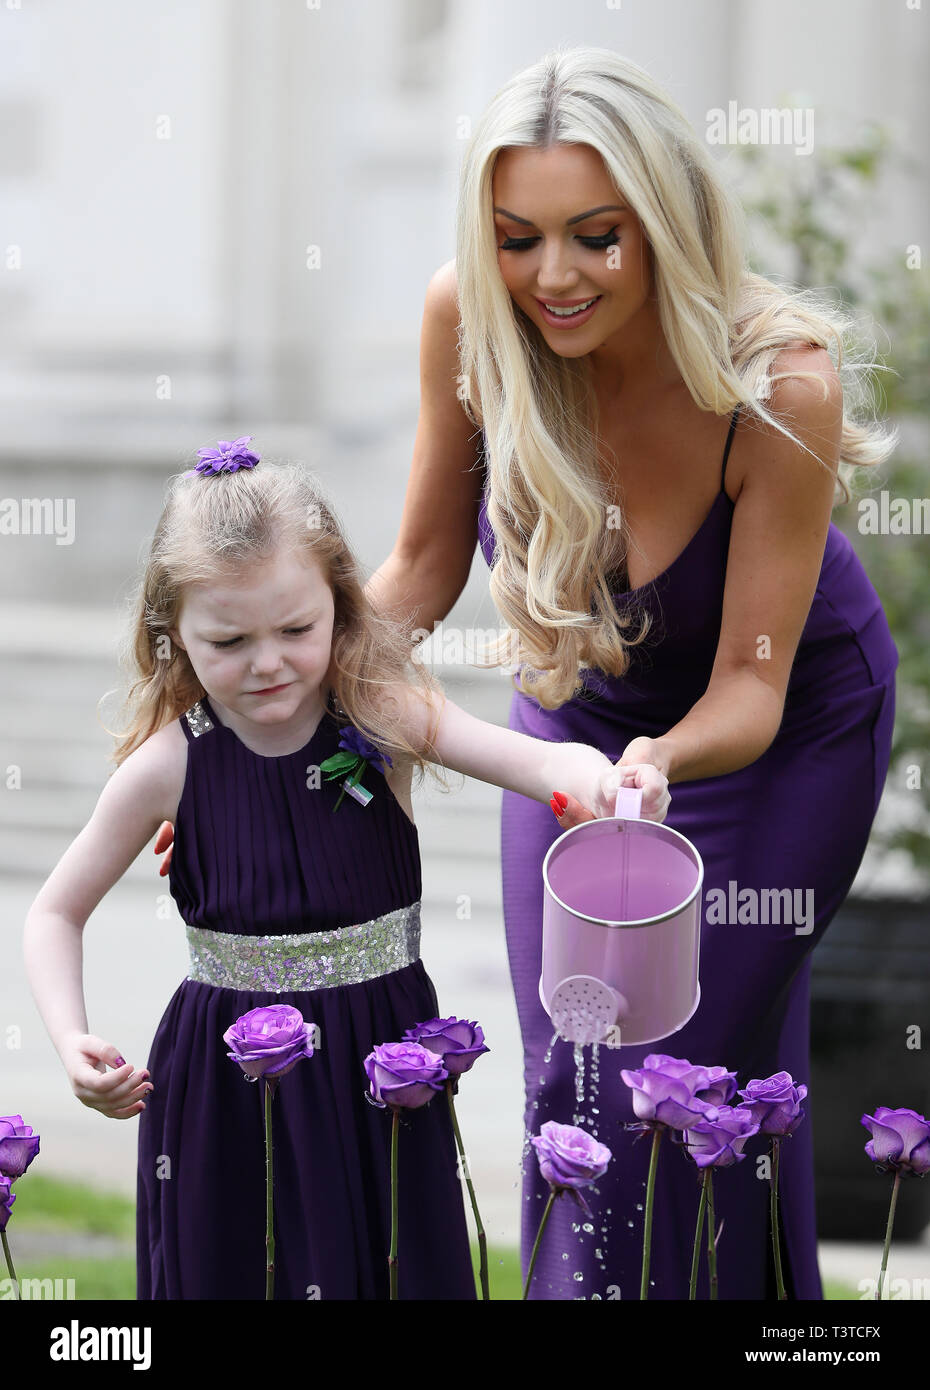 Ruth Forster (5), who lives with cystic fibrosis, with model and Cystic Fibrosis Ireland ambassador Rosanna Davison at a photo call to raise awareness ahead of Cystic Fibrosis Ireland's 65 Roses Day appeal which takes place Friday 12th April. Stock Photo